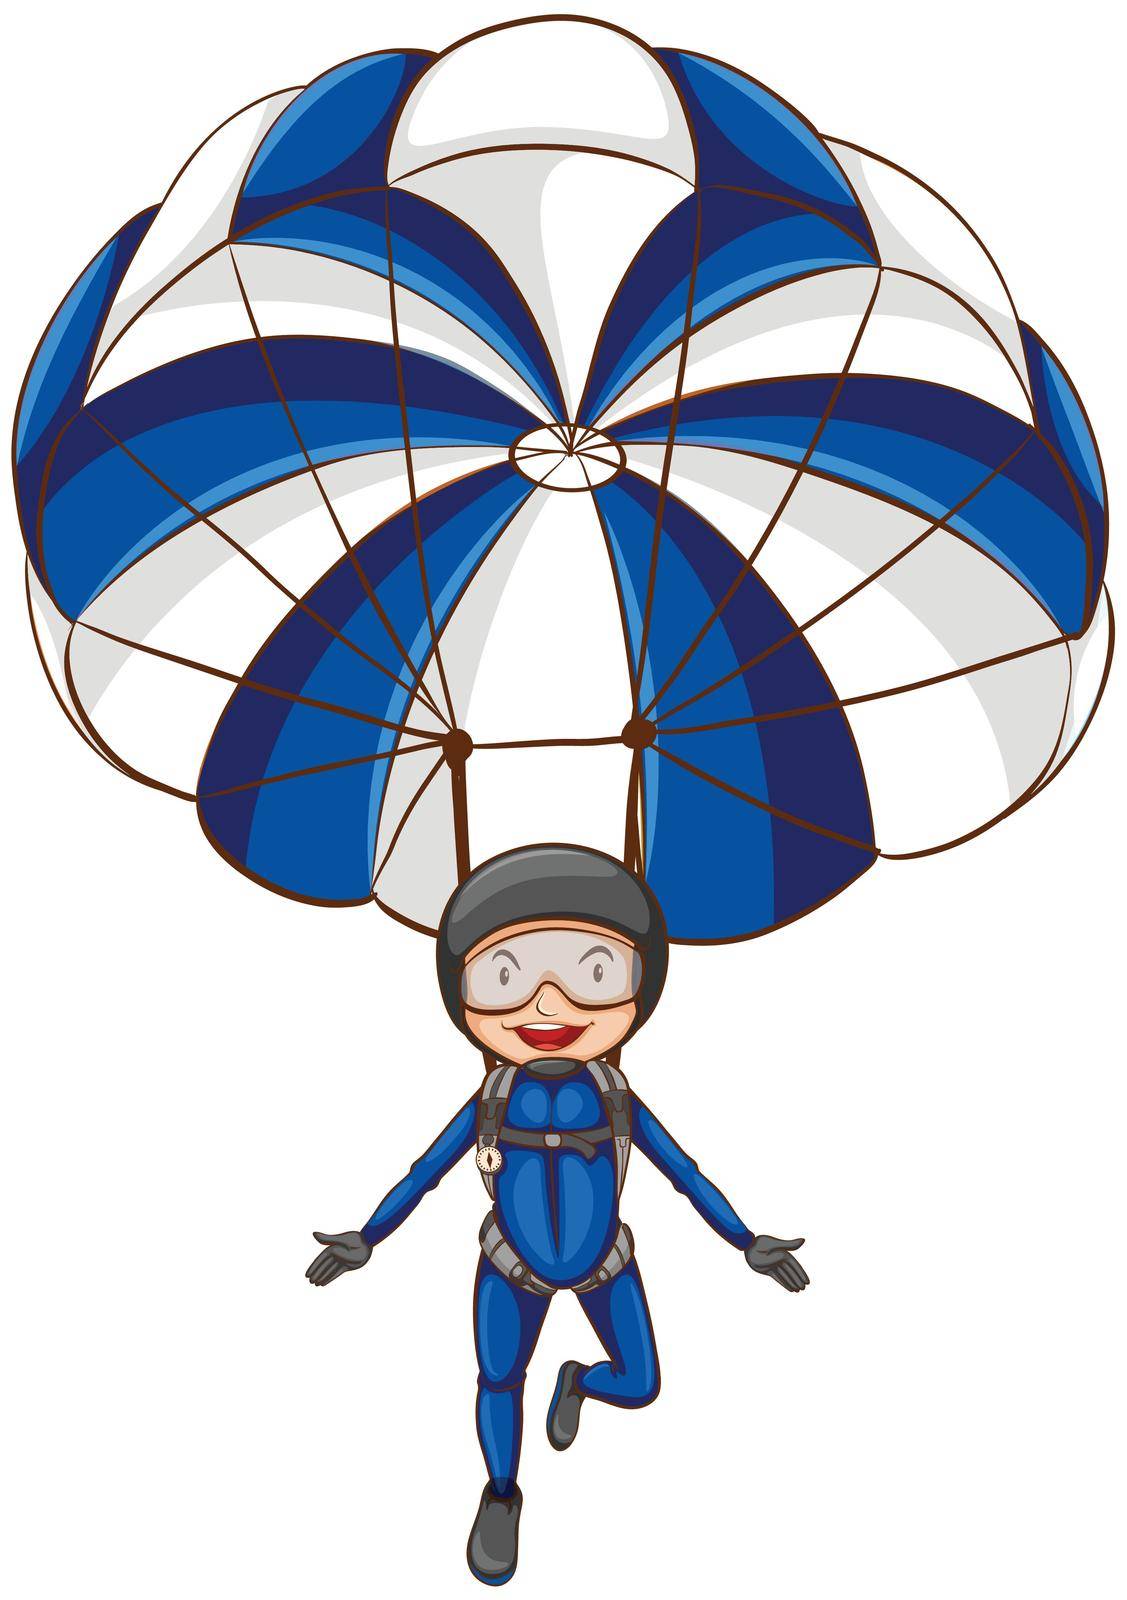 Illustration of sketch of a parachute with a boy a on a white background